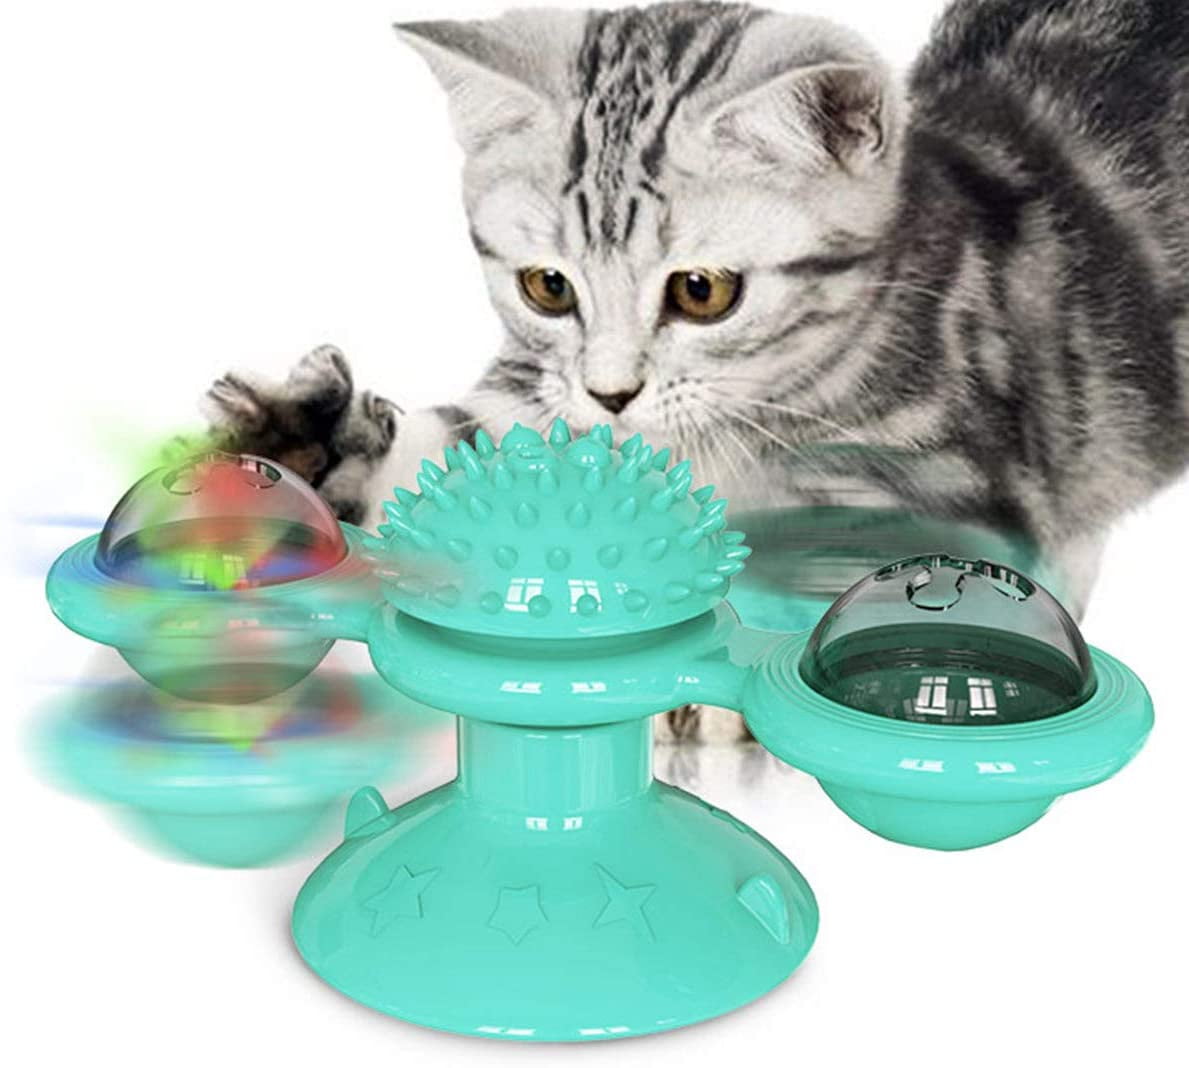 Odosalii Cat Toys Interactive Teasing Cat Toy Windmill Turntable Teasing Cat Toy Scratching Tickle Hair Brush Pet Accessories Turntable Crazy Game